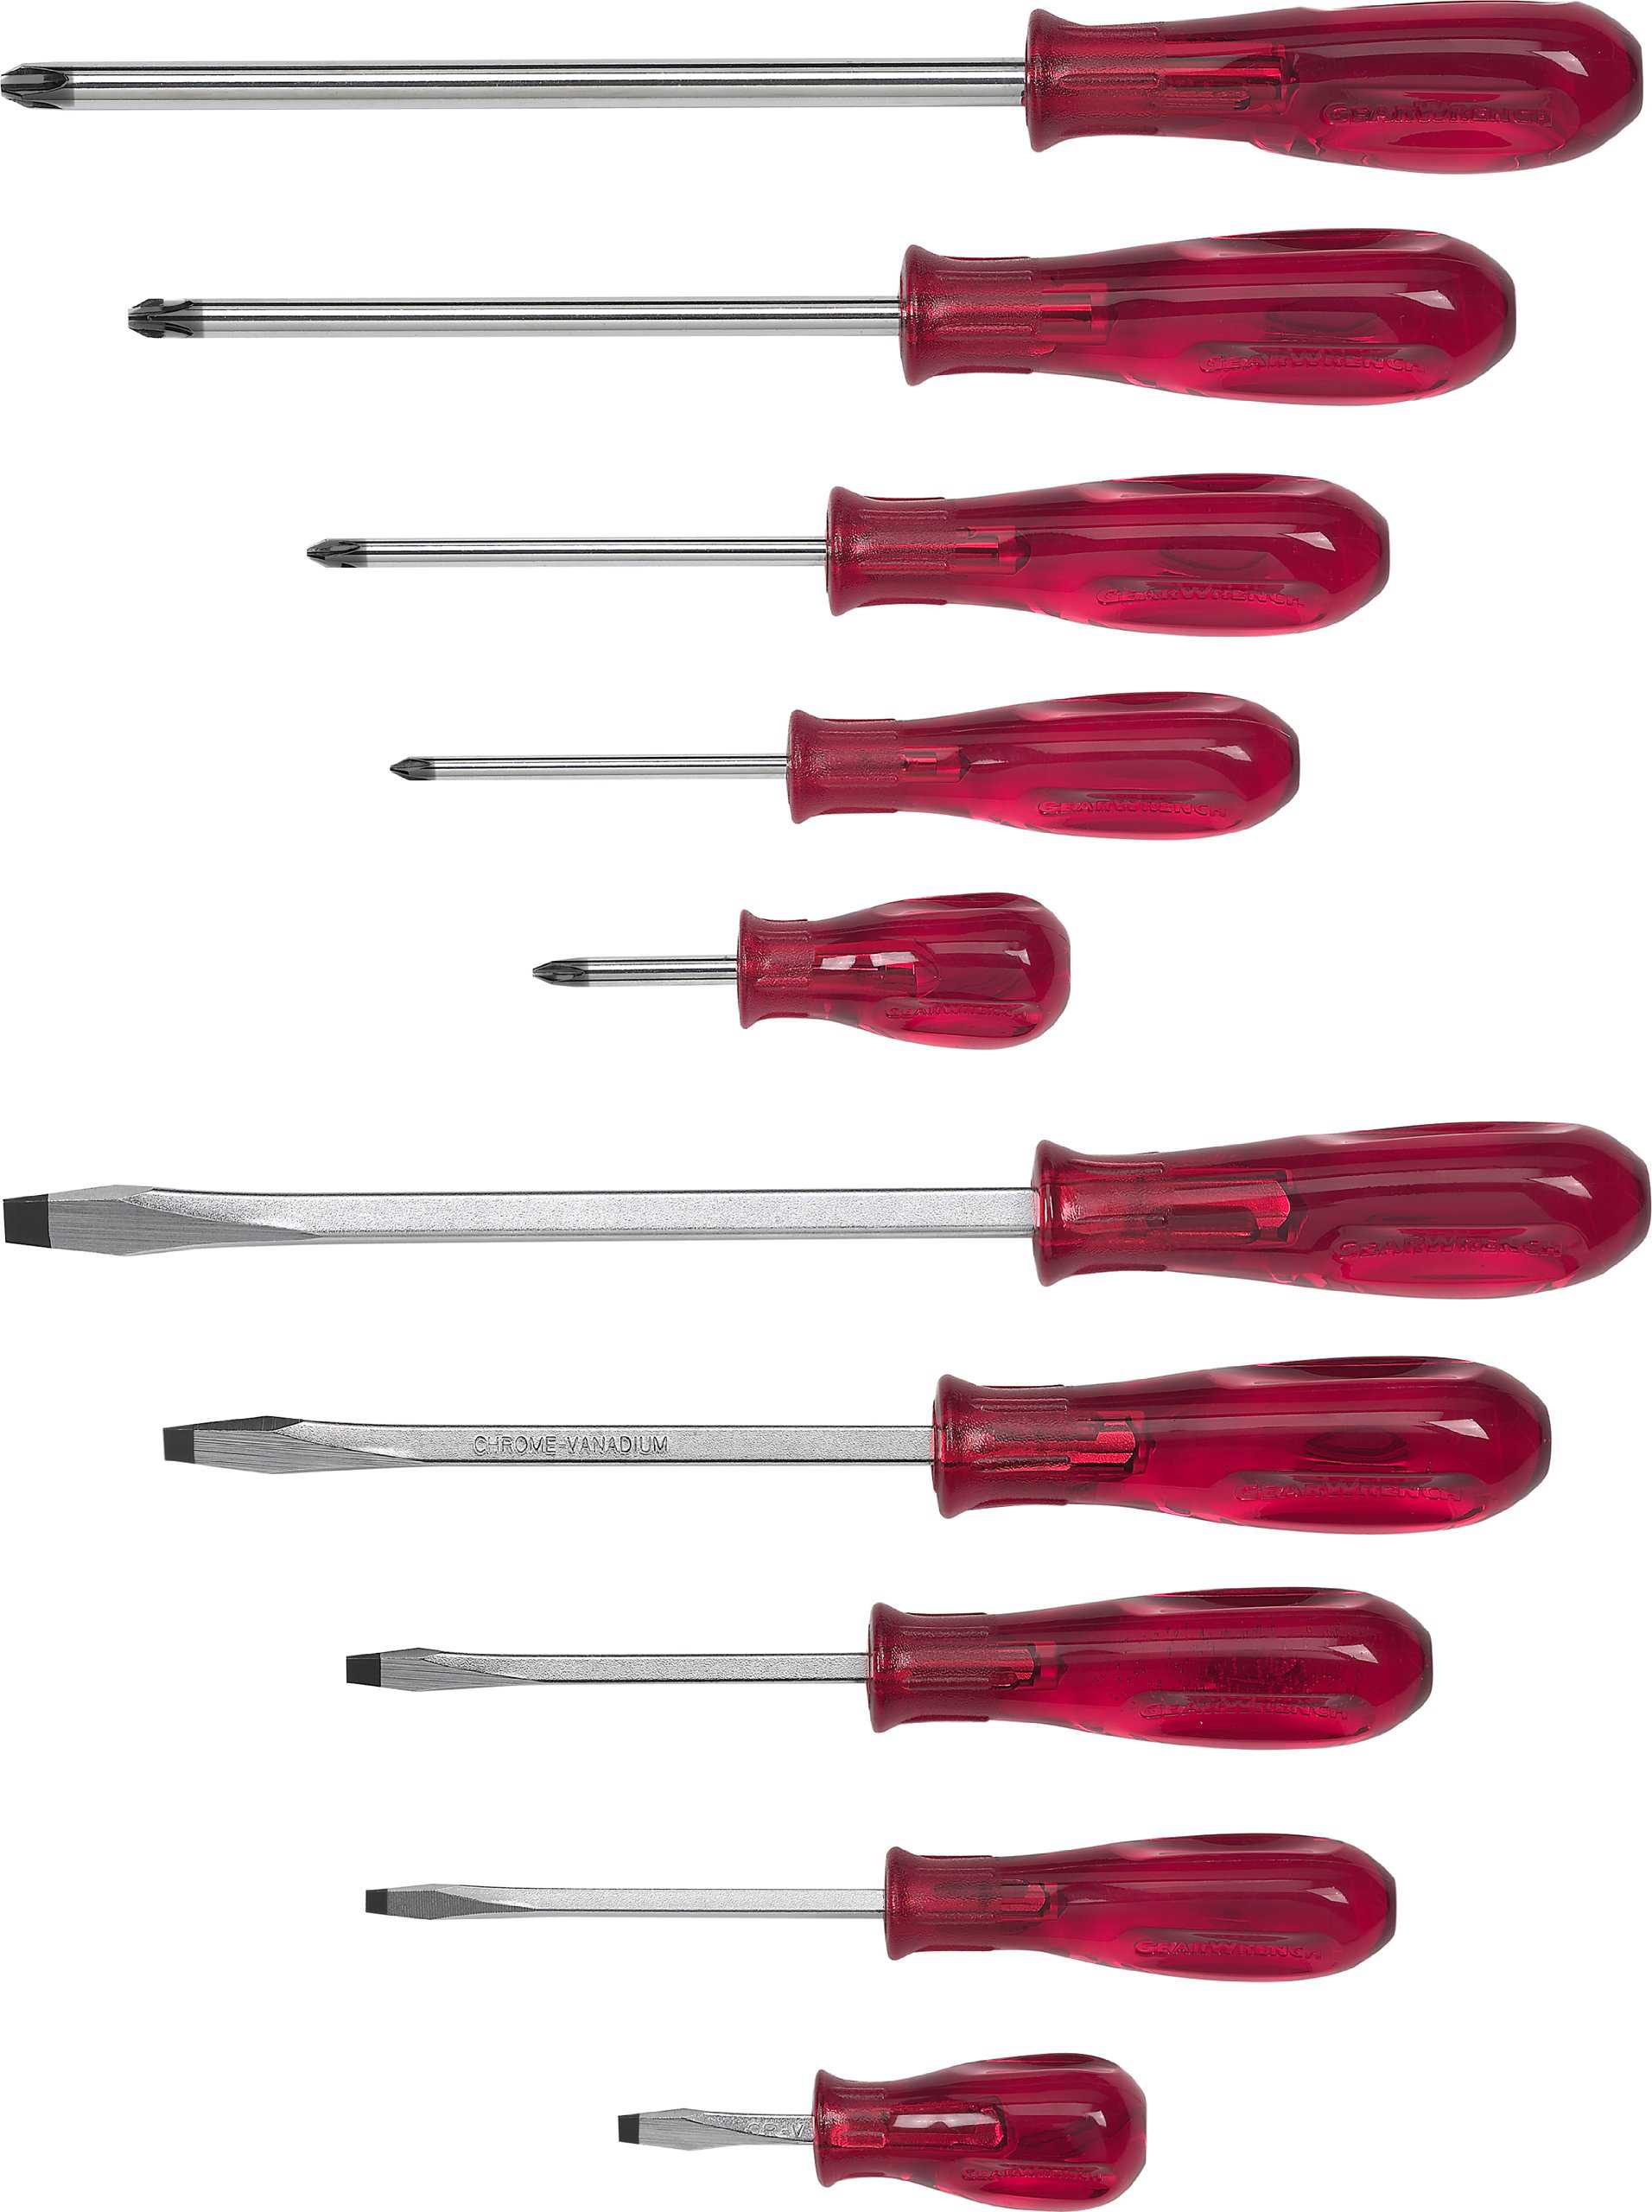 Gearwrench KDT-82731 10 Pc. Combination Solid Handle Screwdriver Set